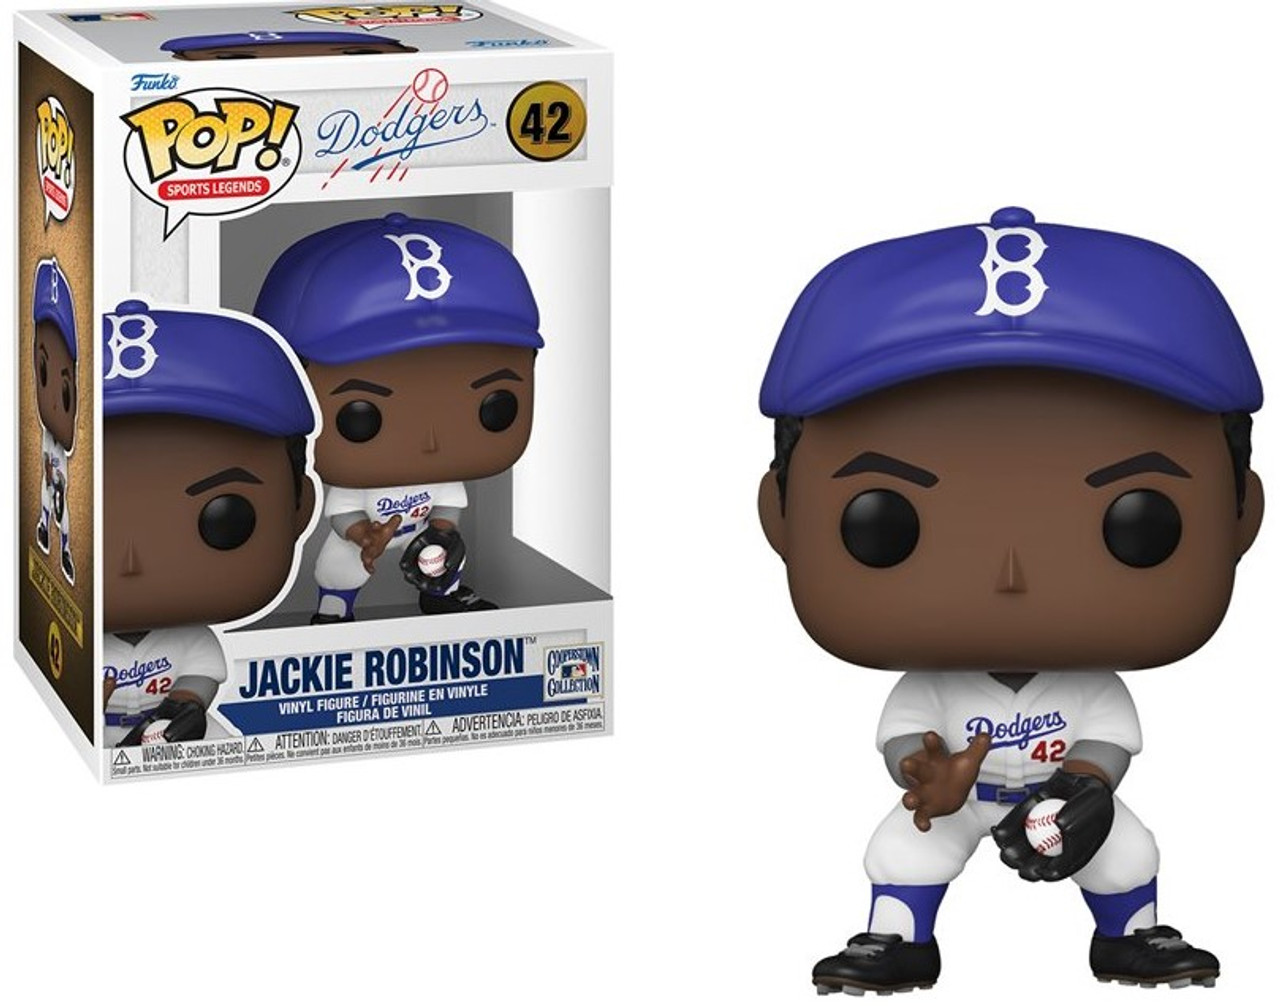  Jackie Robinson ReAction Figure by Super7 : MLB